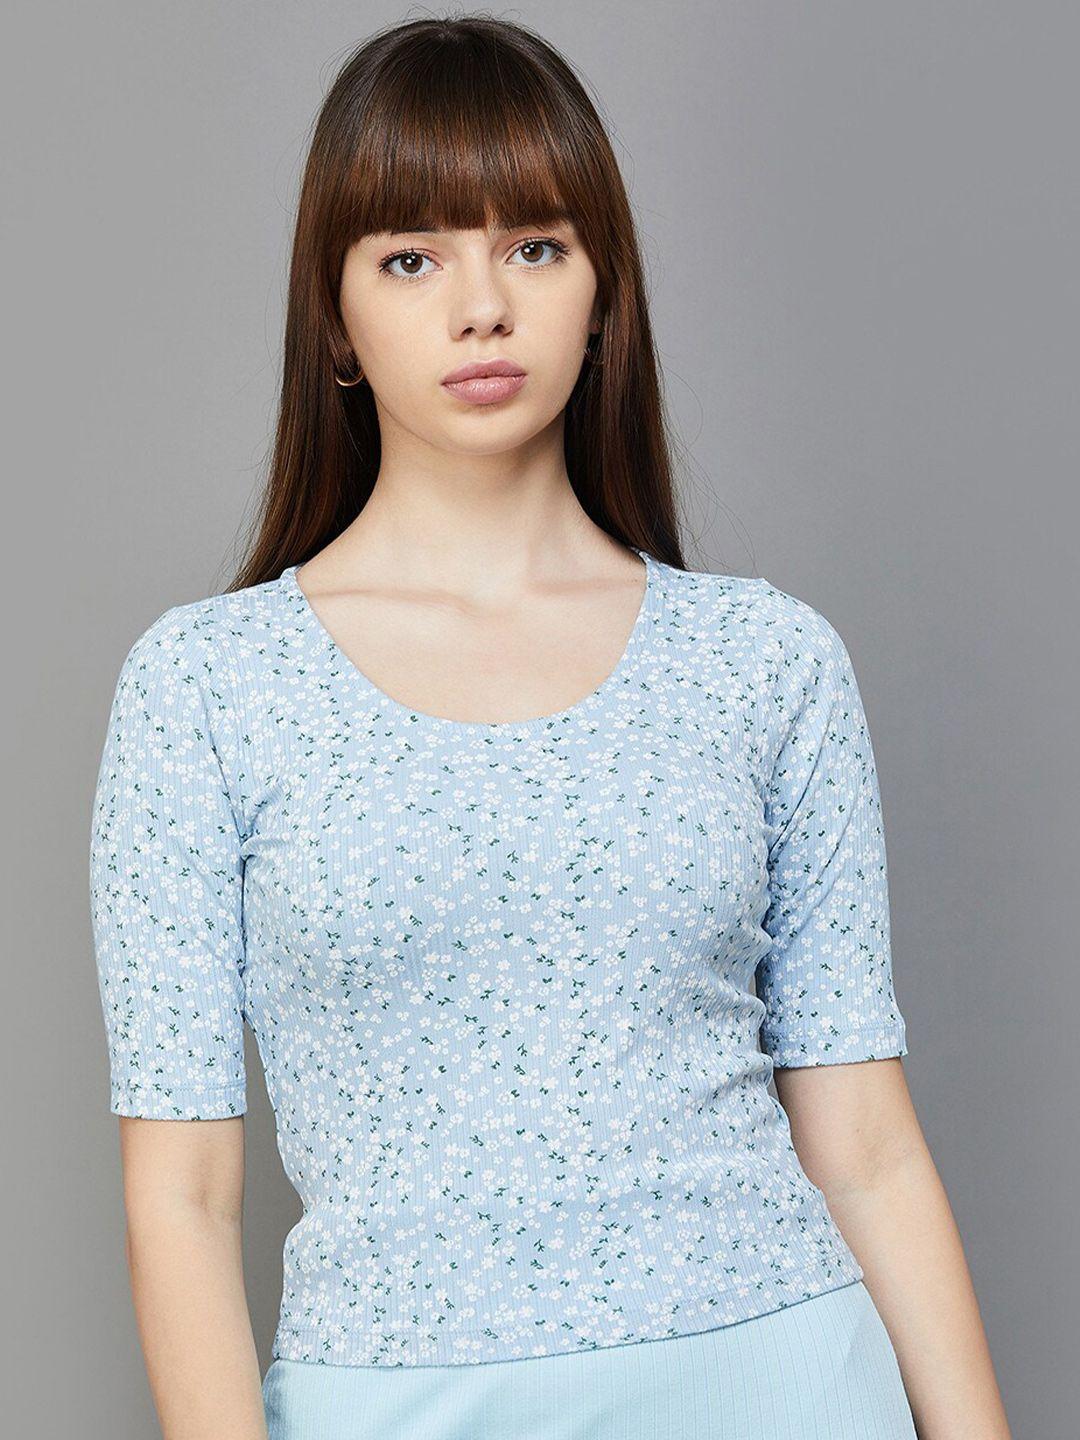 ginger by lifestyle floral printed round neck top